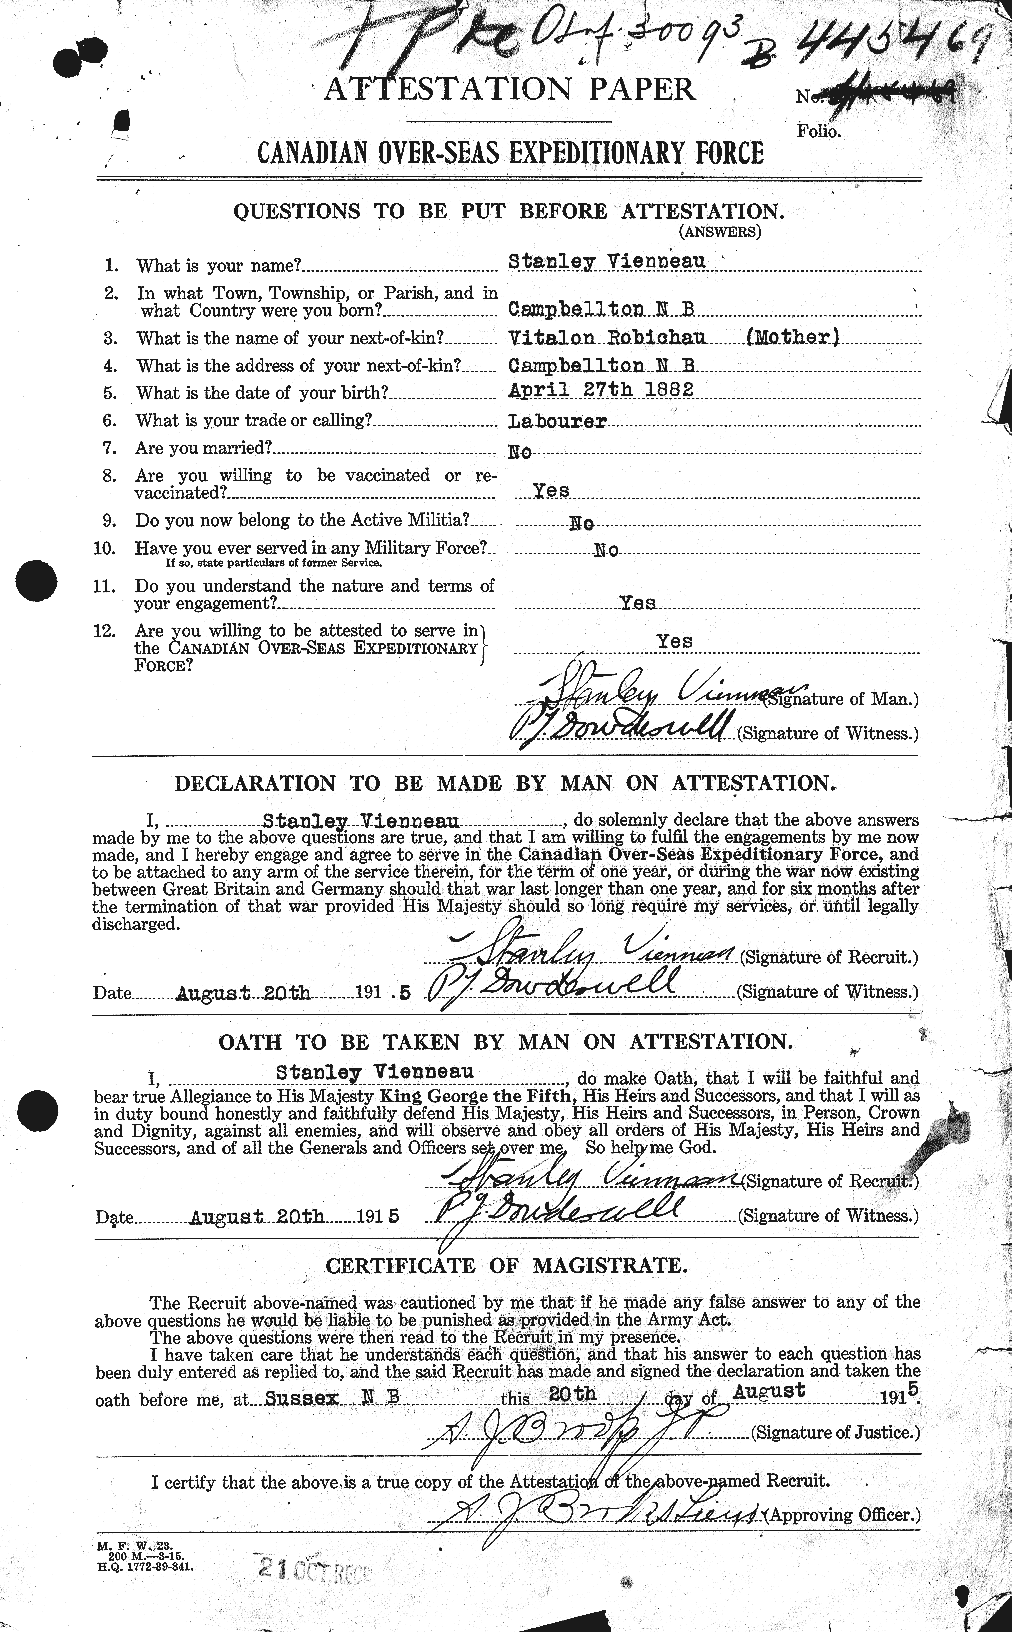 Personnel Records of the First World War - CEF 652383a